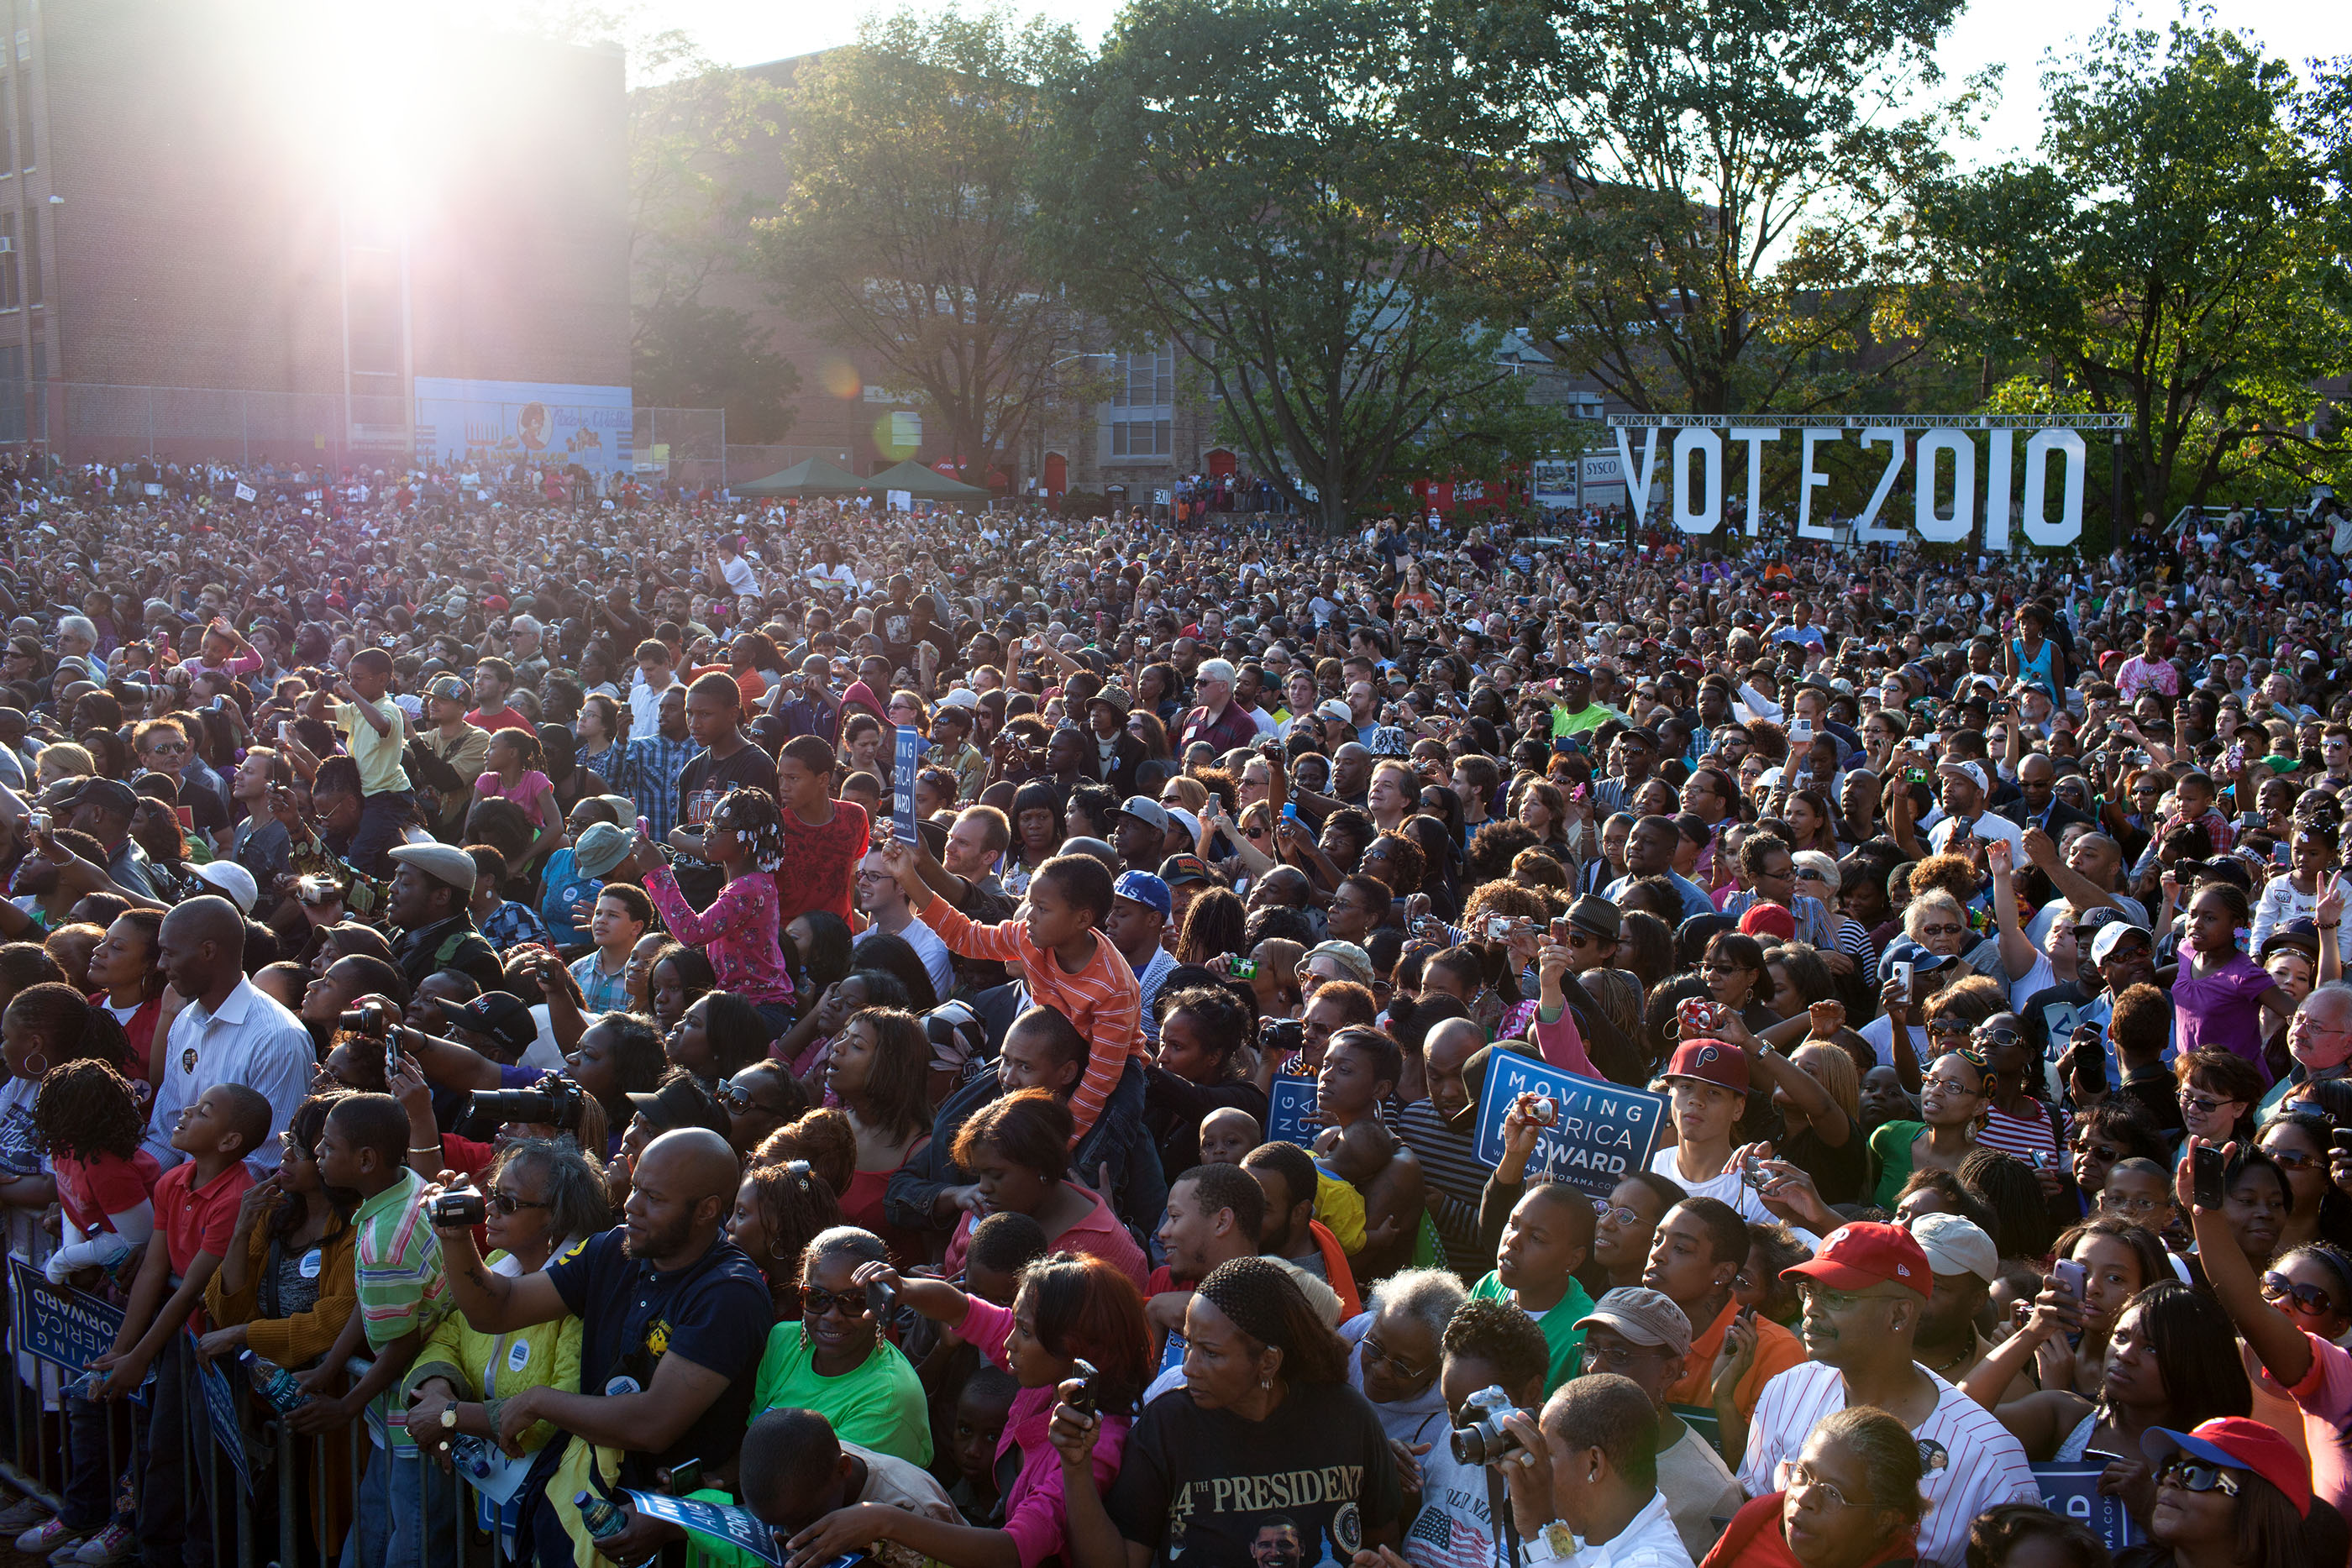 Pennsylvania, Oct. 10, 2010. The crowd at a rally in Philadelphia. (Official White House Photo by Pete Souza)